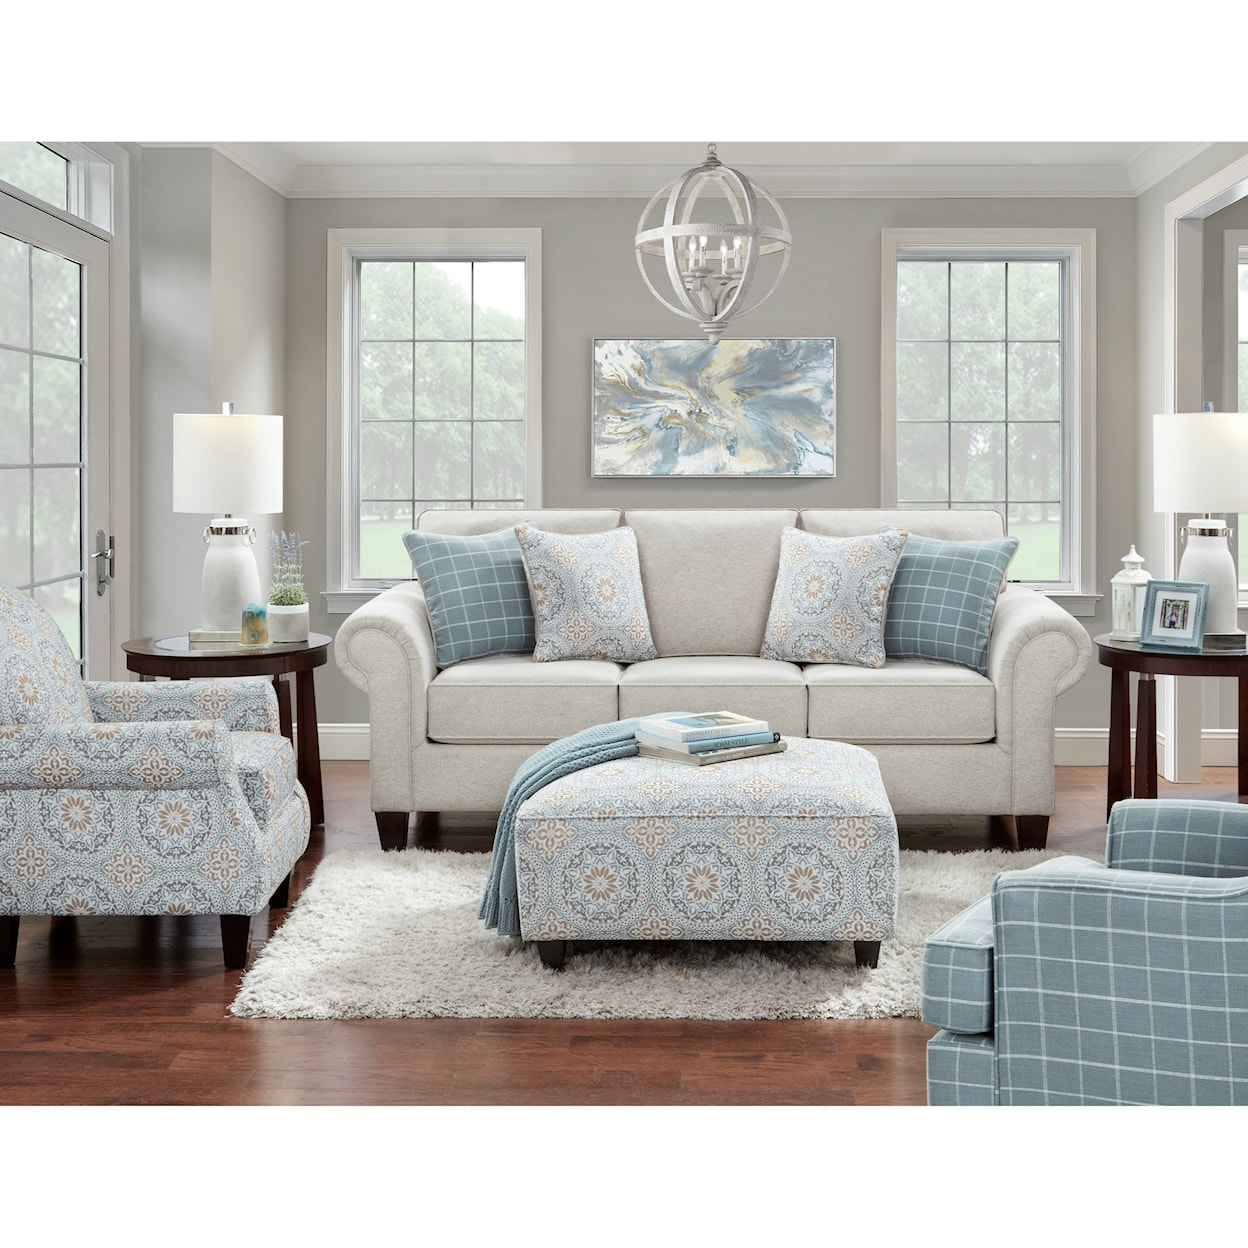 Fusion Furniture 3100 BATES NICKLE Living Room Group